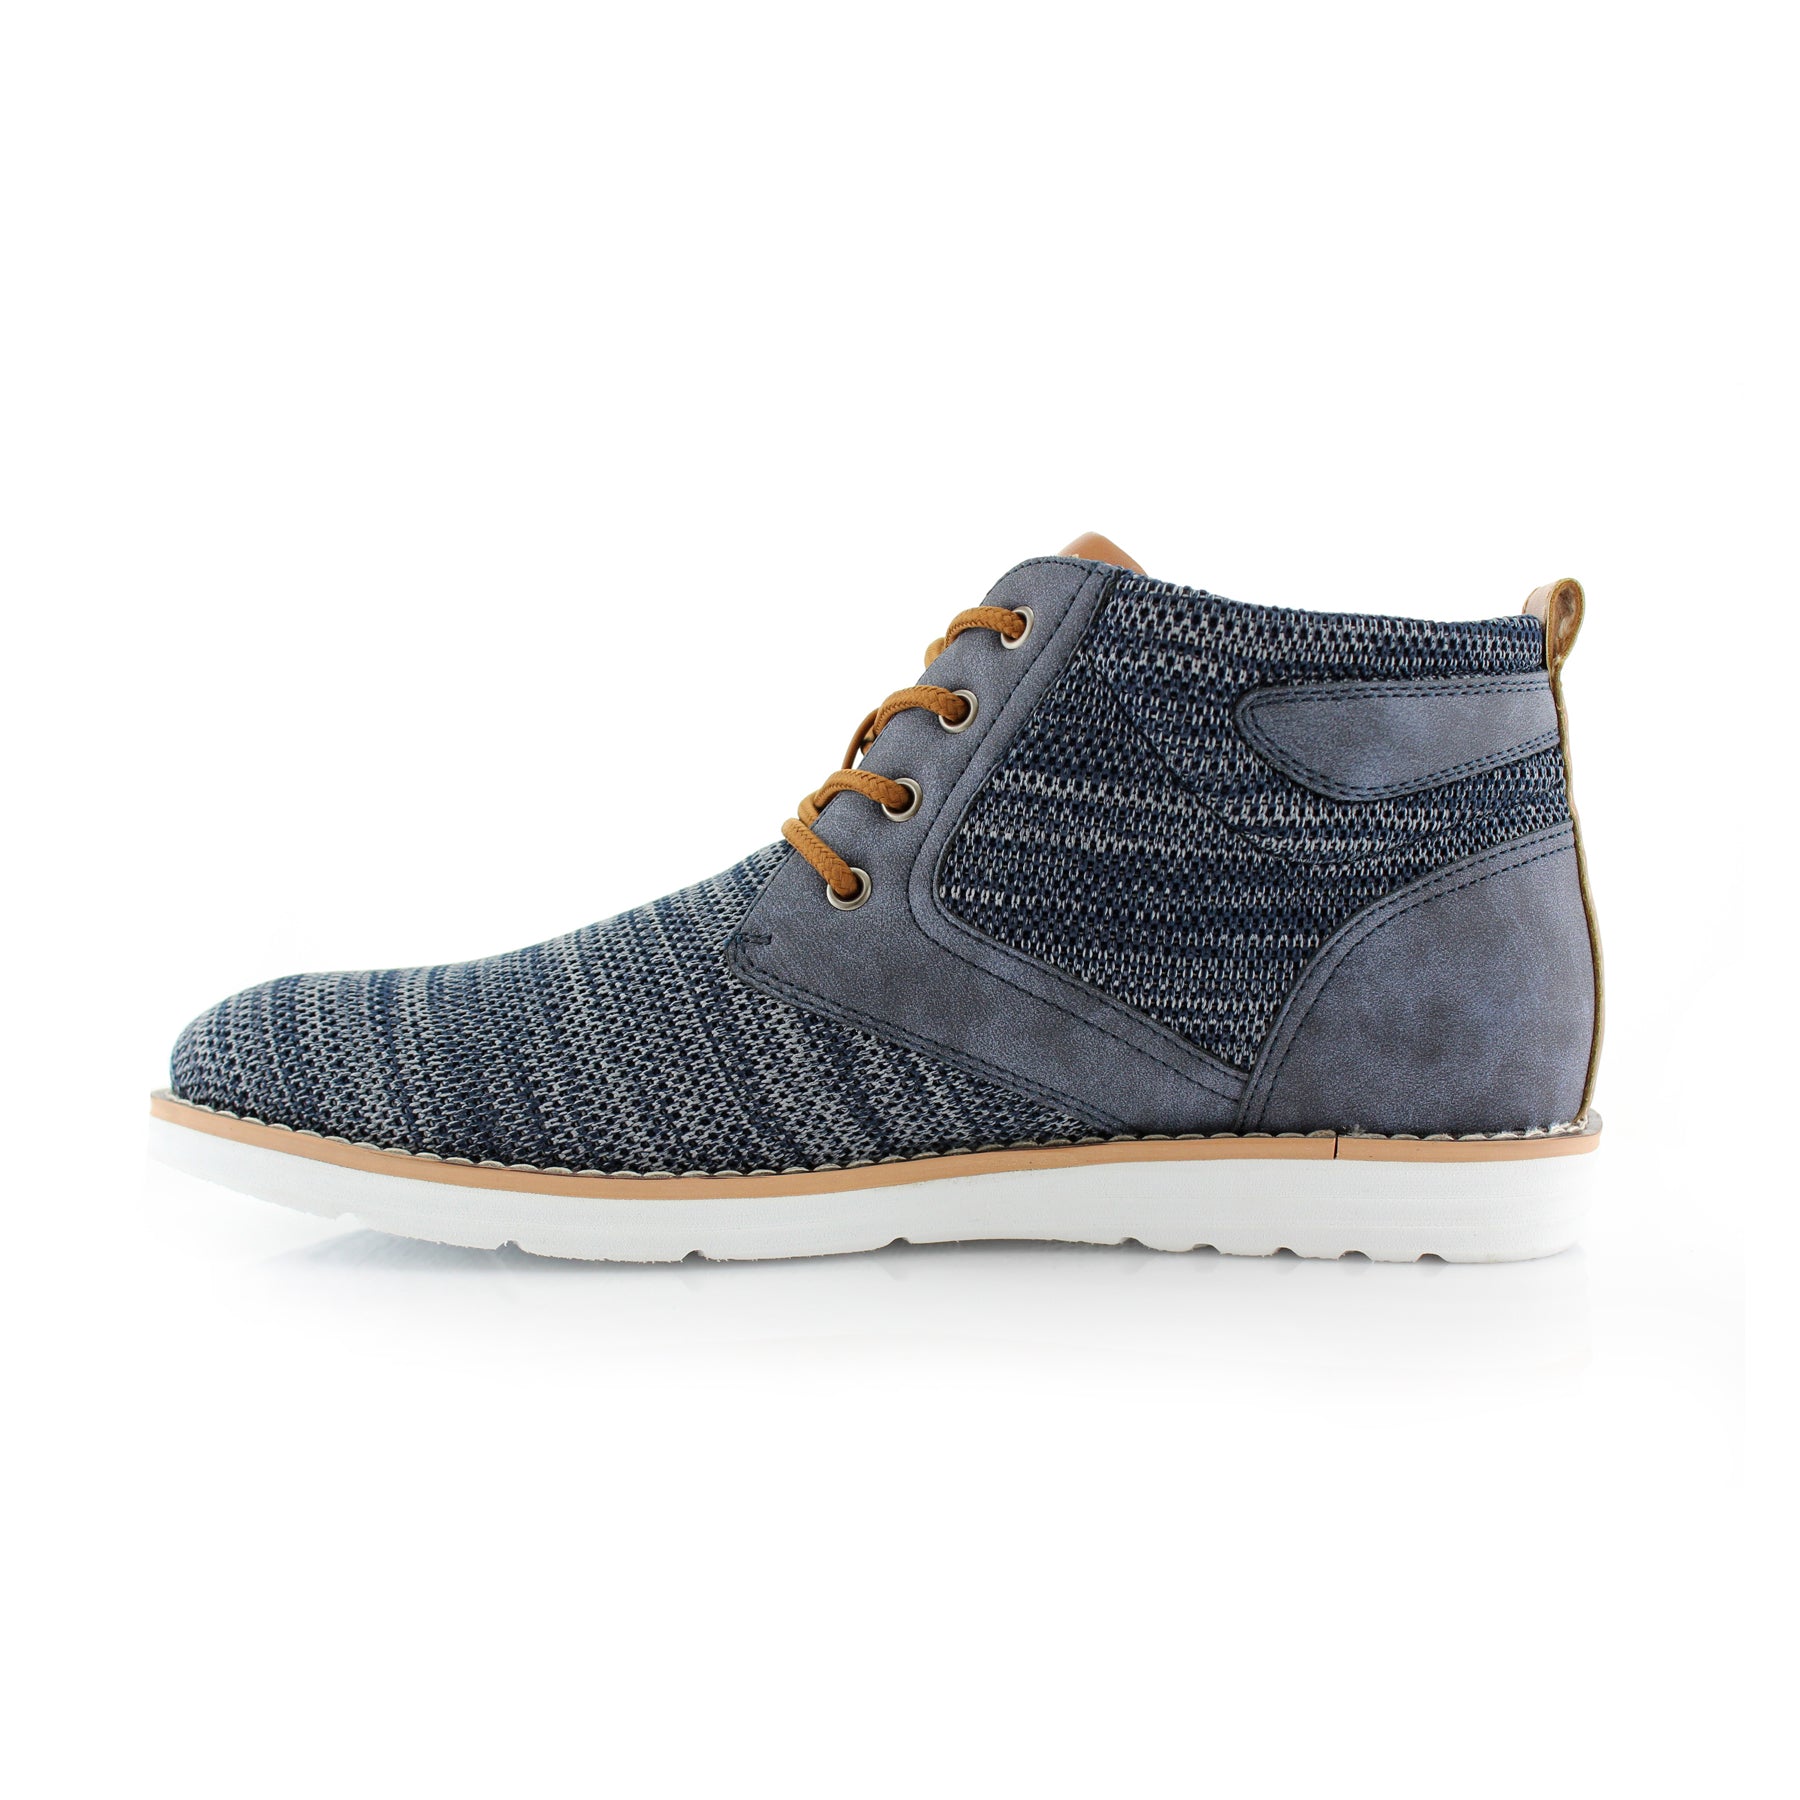 Duo-textured Sneaker Chukka Boots | Bohort by Polar Fox | Conal Footwear | Inner Side Angle View